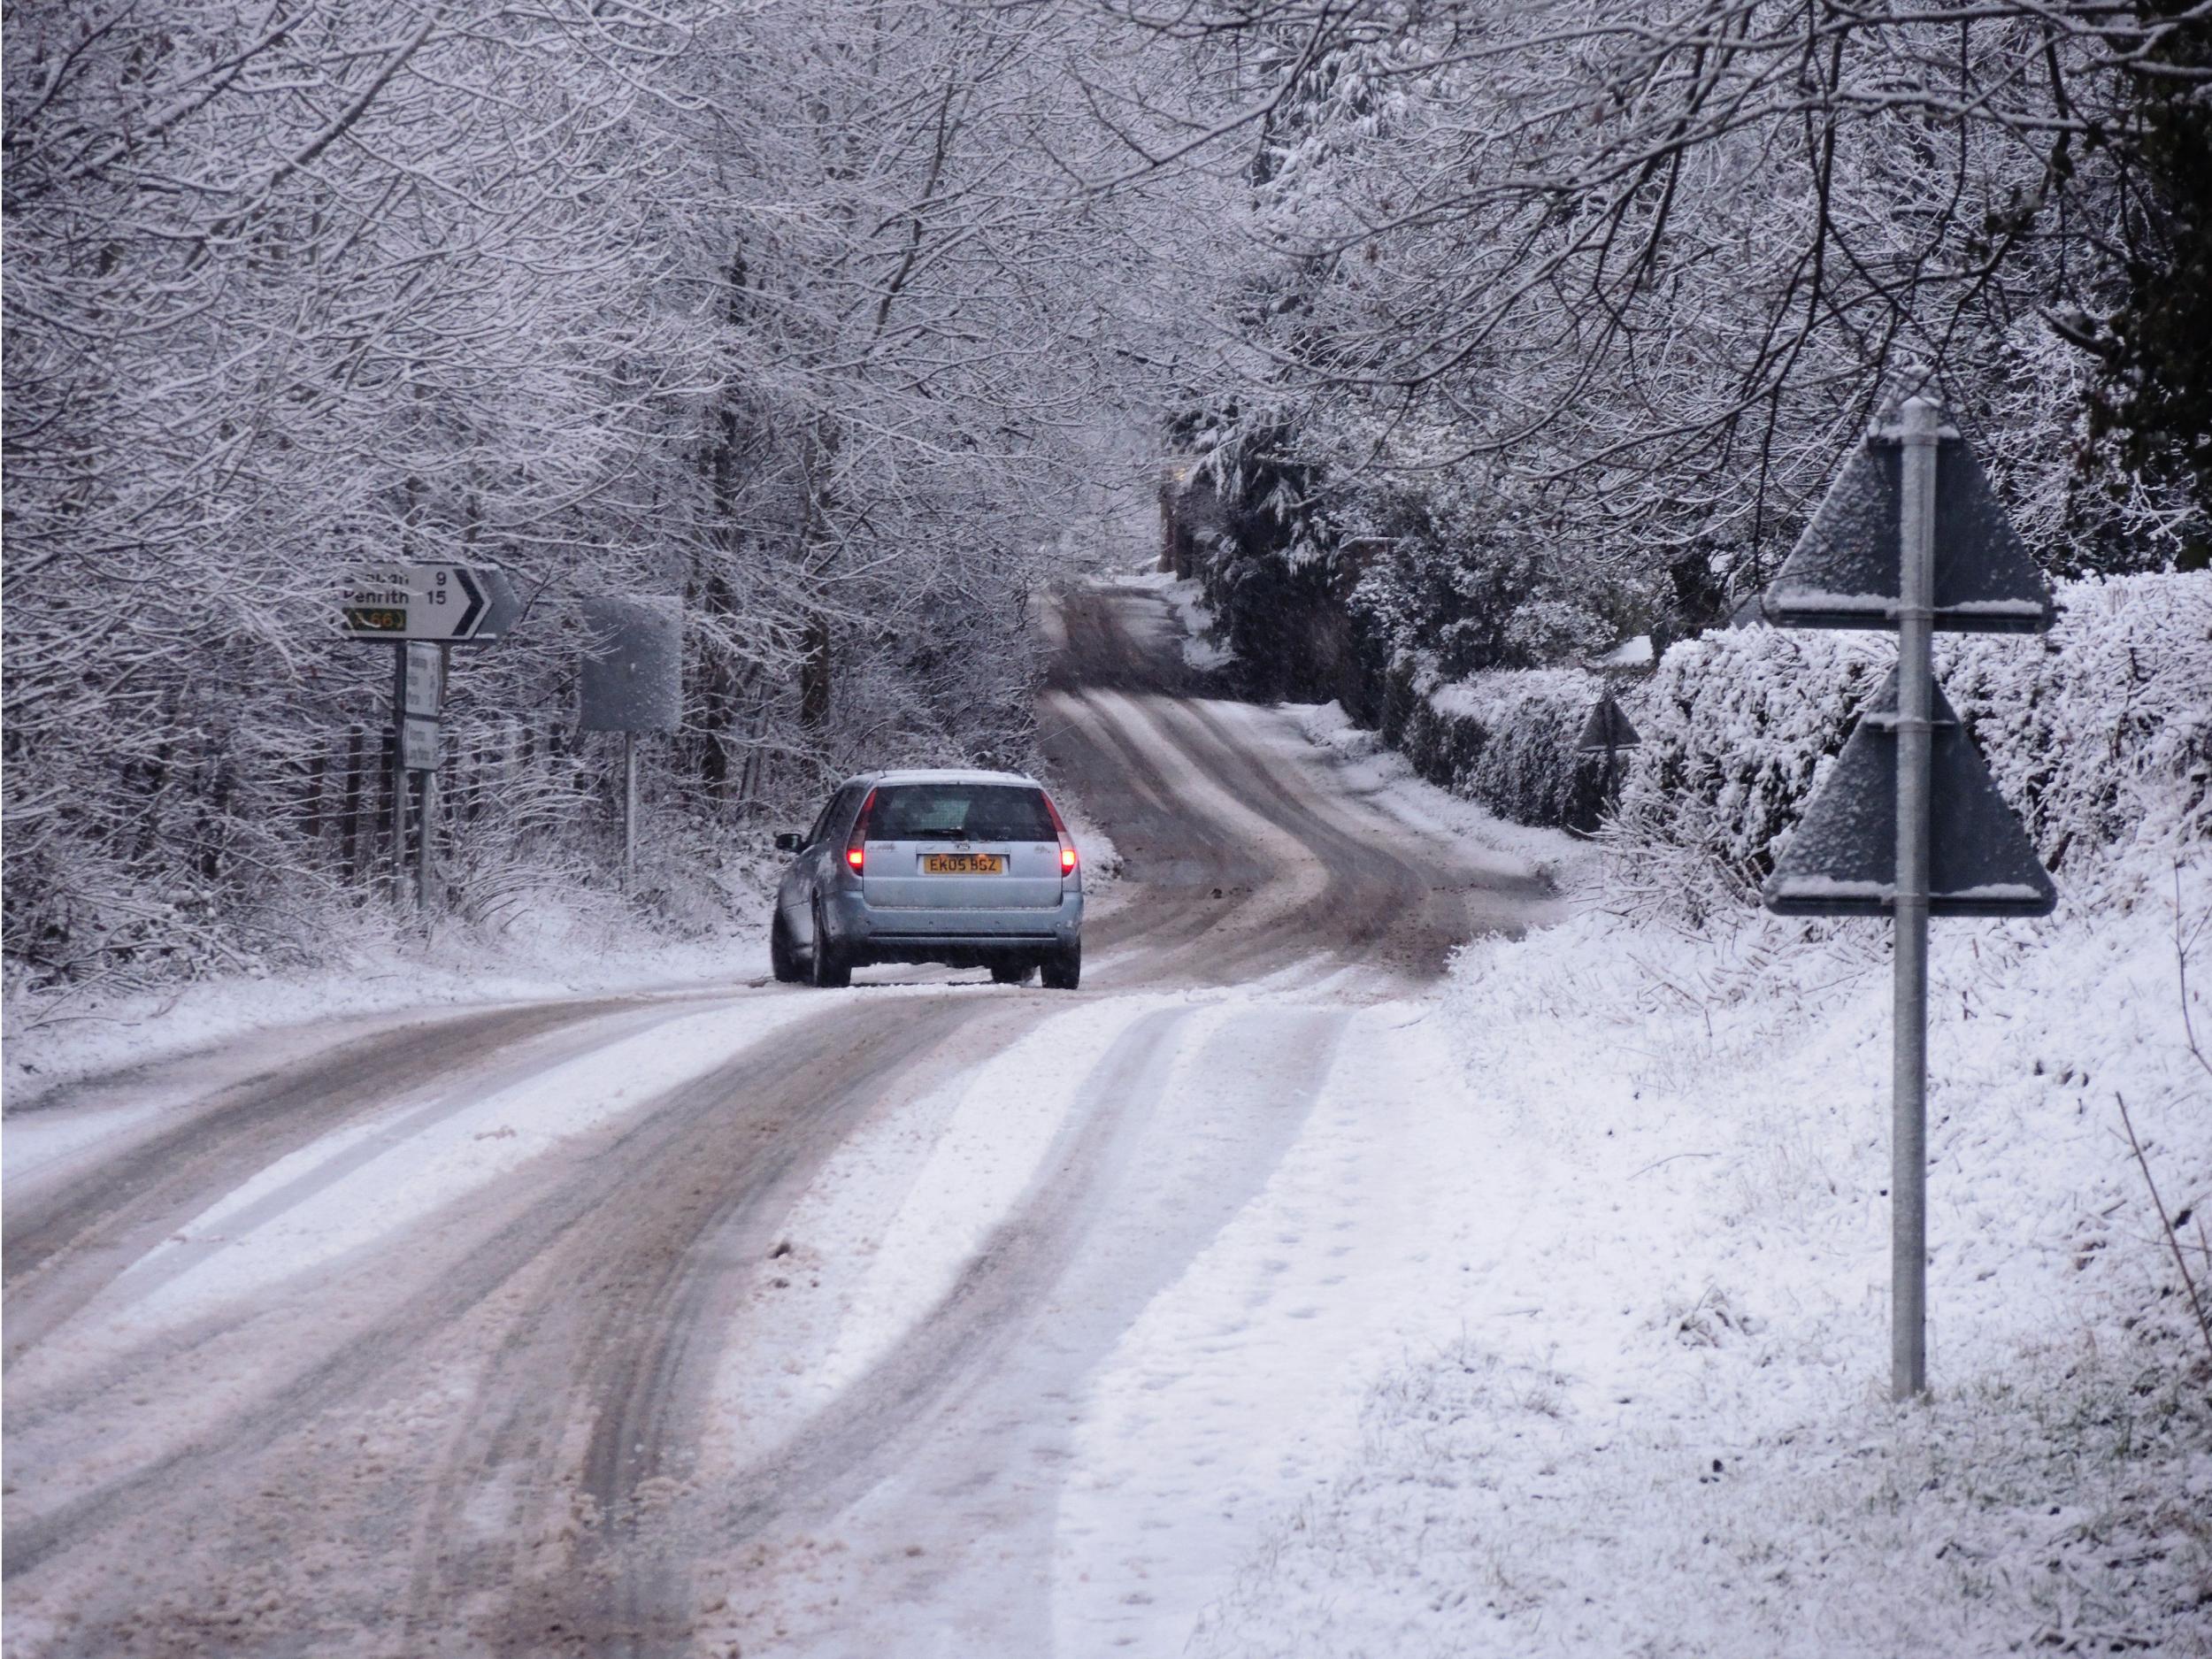 UK weather: Snow to be washed away by rain as 'miserable